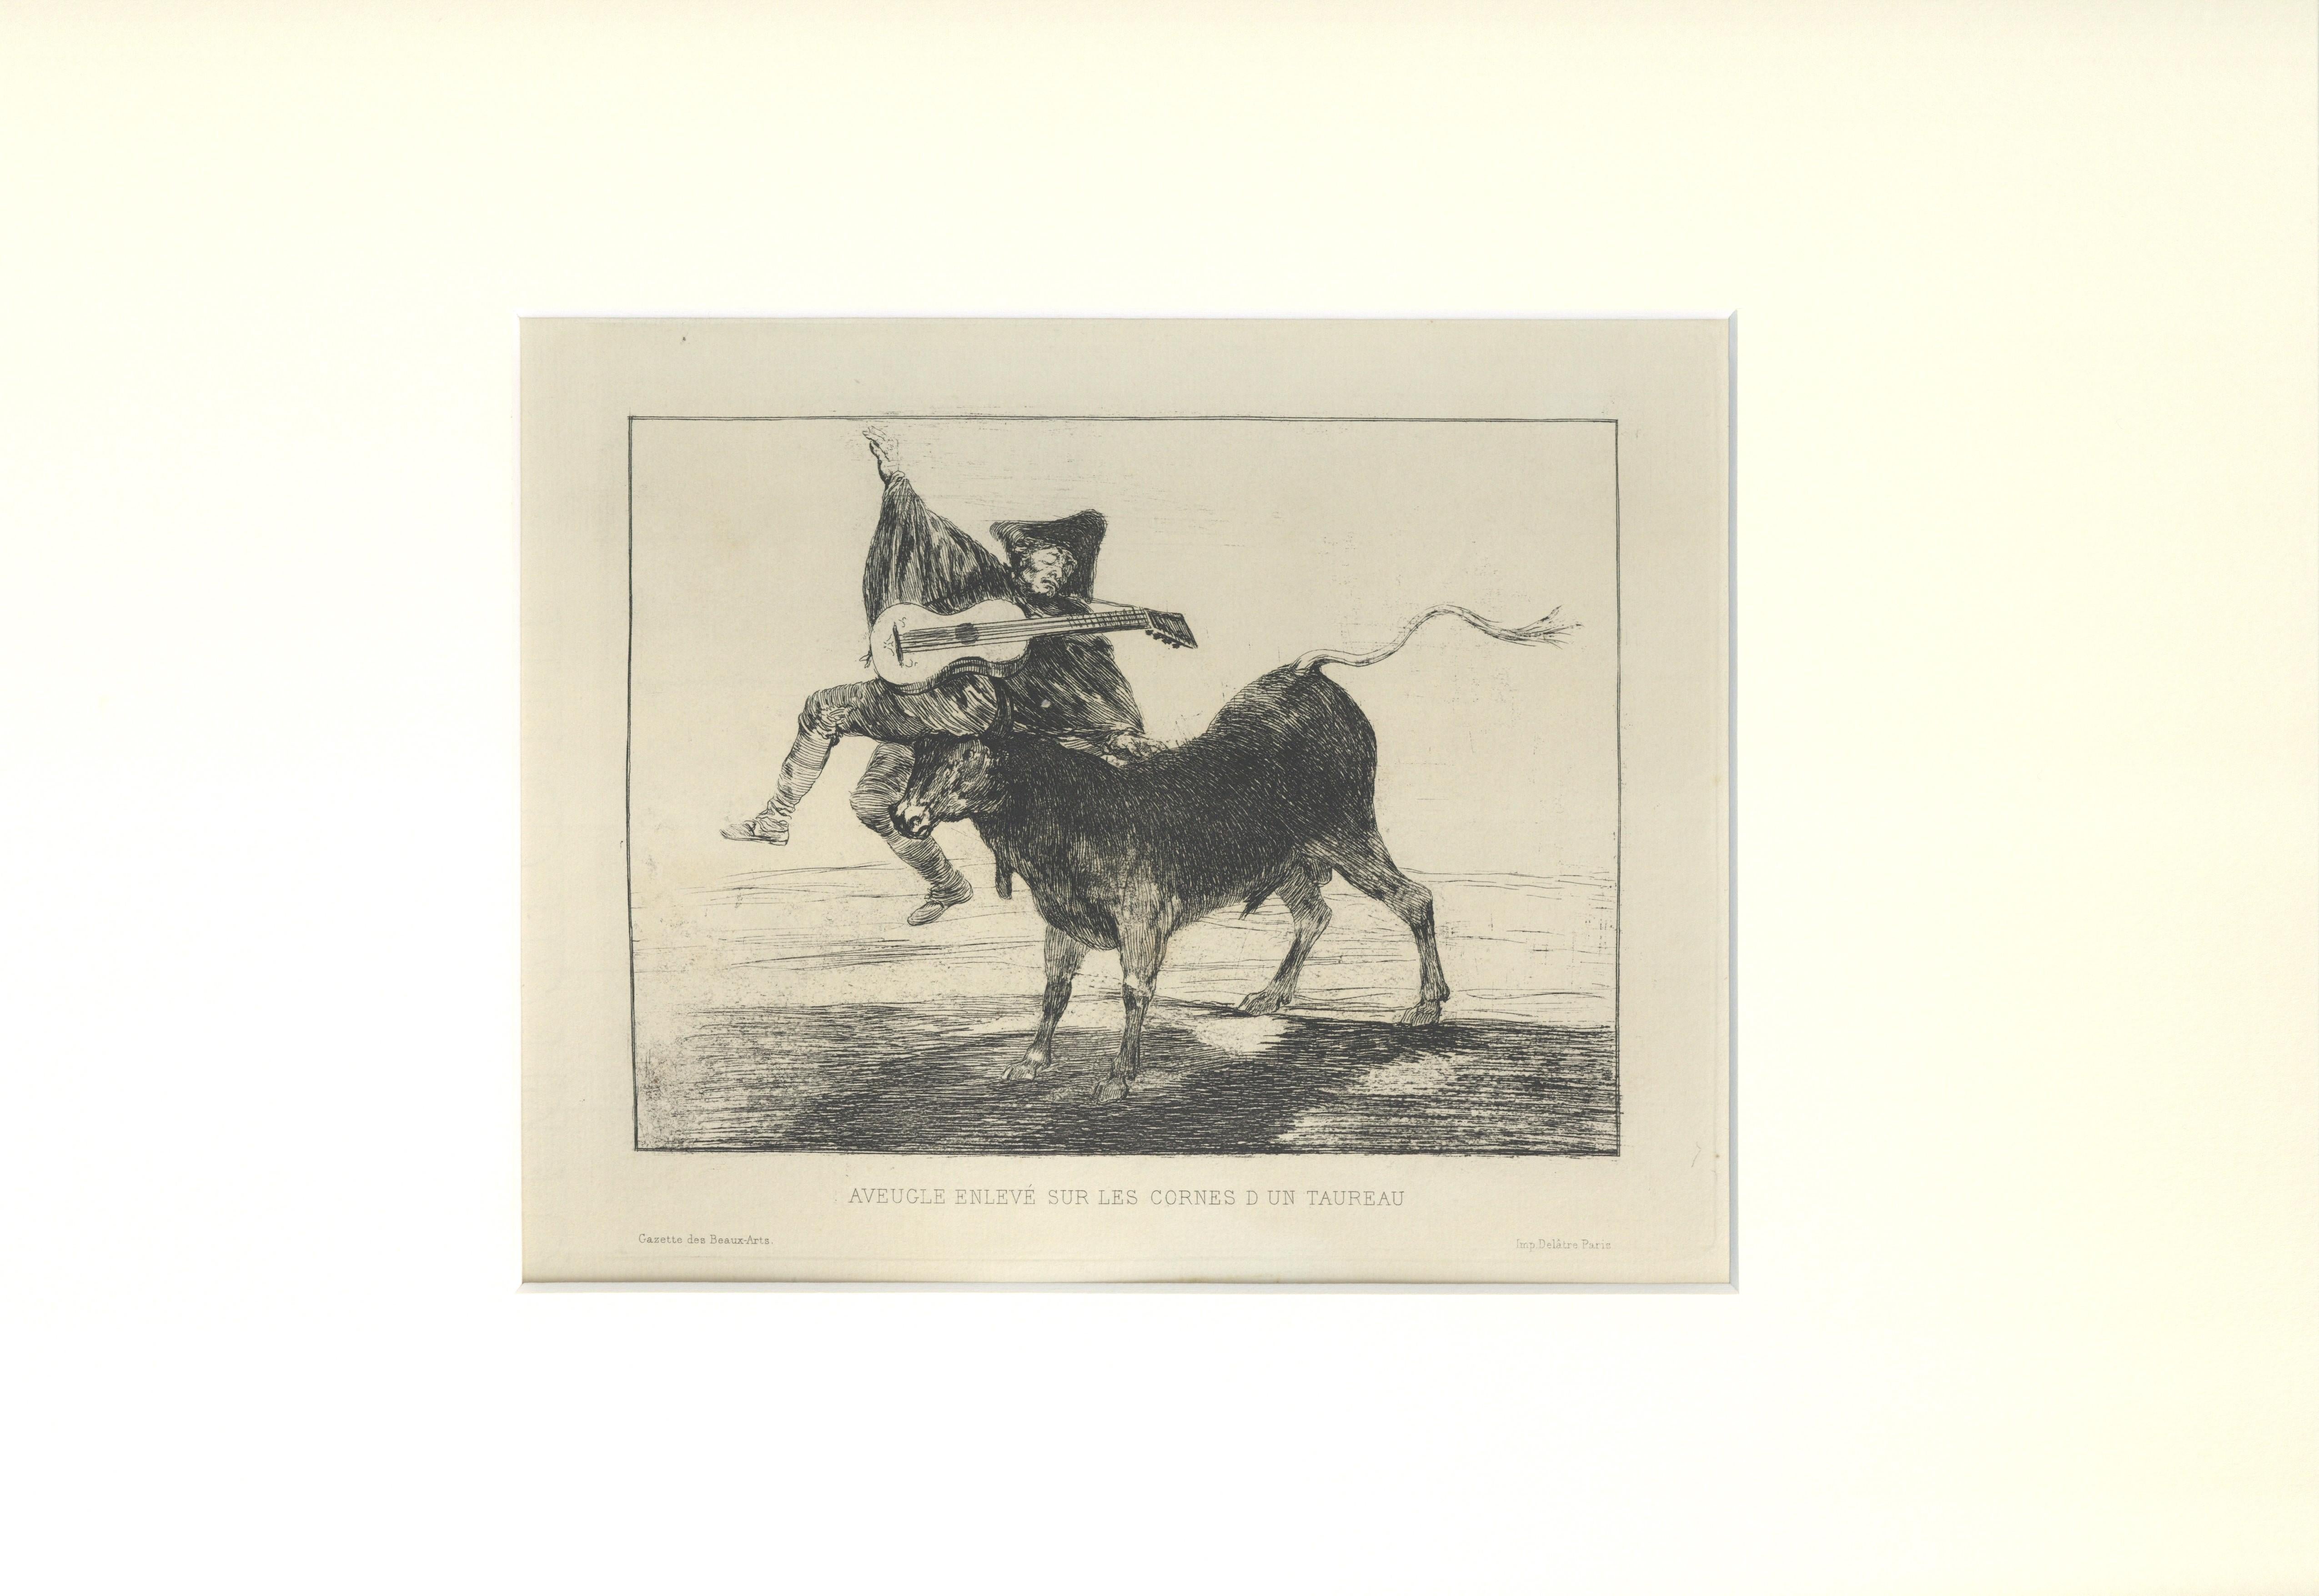 Blind Man Tossed on the Hors of a Bull.
Image dimensions: 13.8x18 cm.
First edition. Labelled at the bottom 